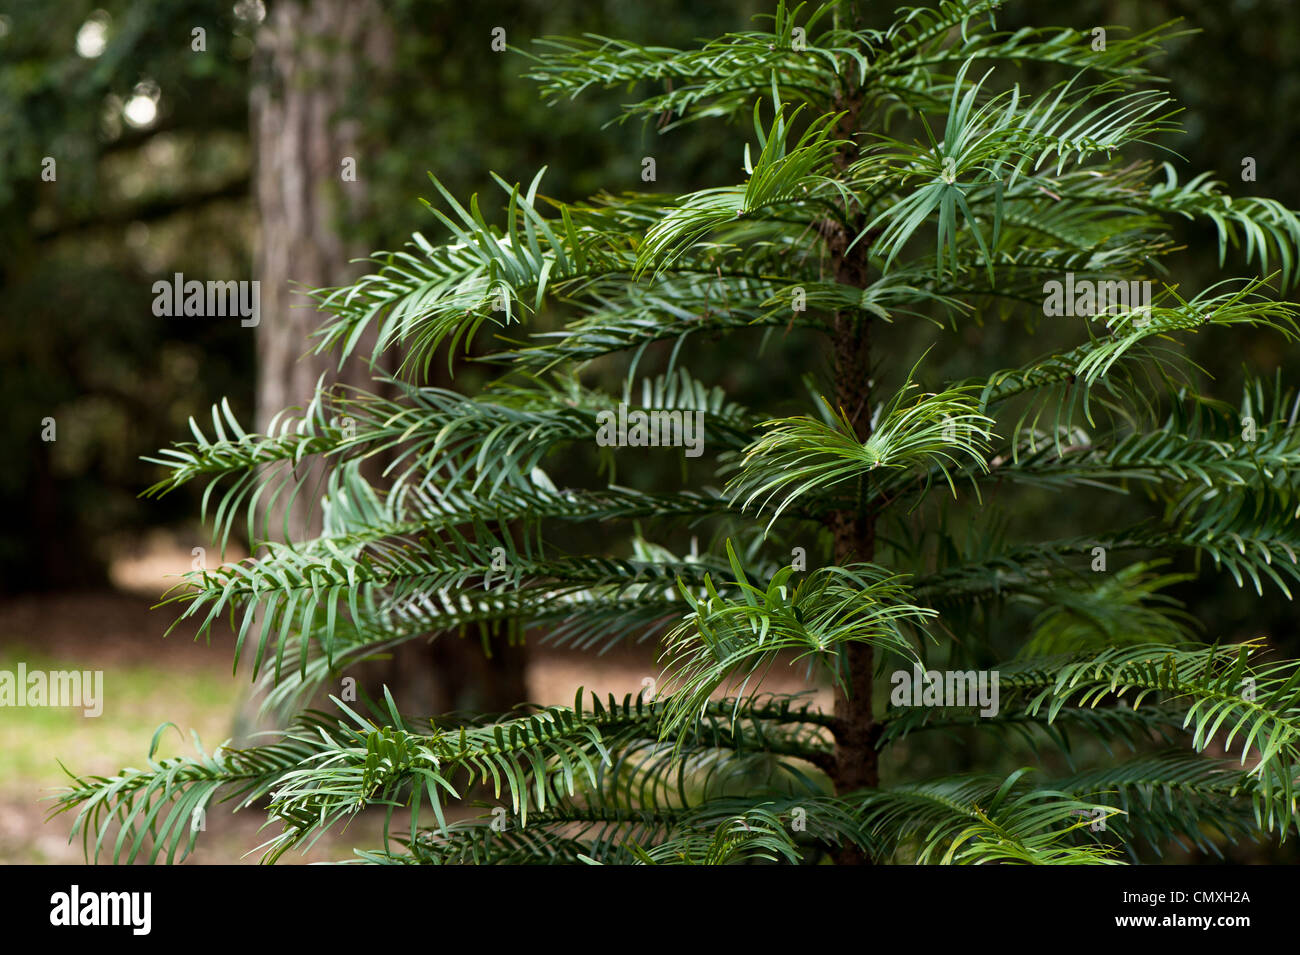 Young Wollemia nobilis, Wollemi Pine, tree Stock Photo